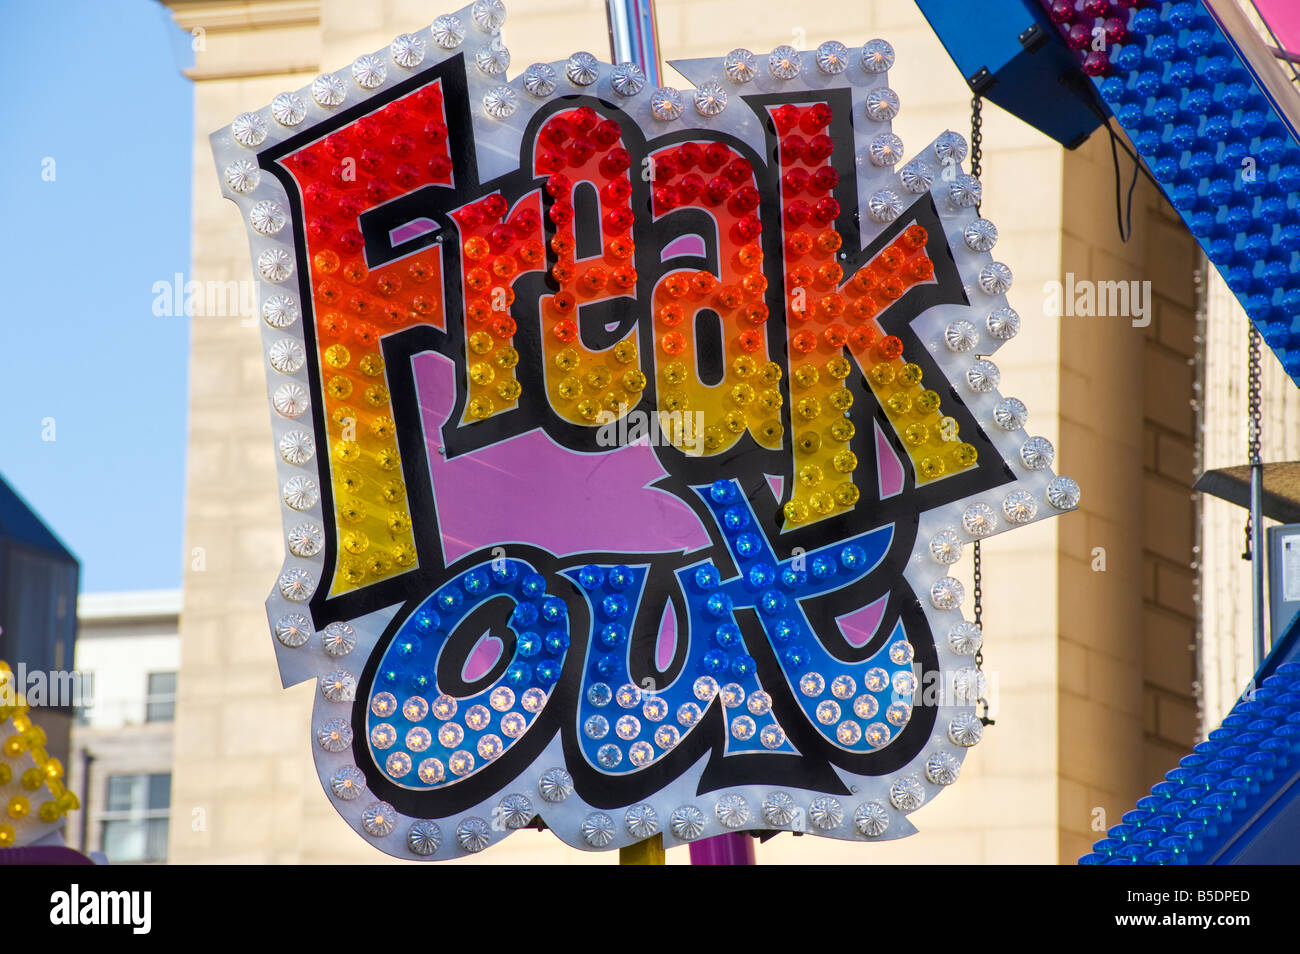 Freak Out sign on a Fairground ride Stock Photo